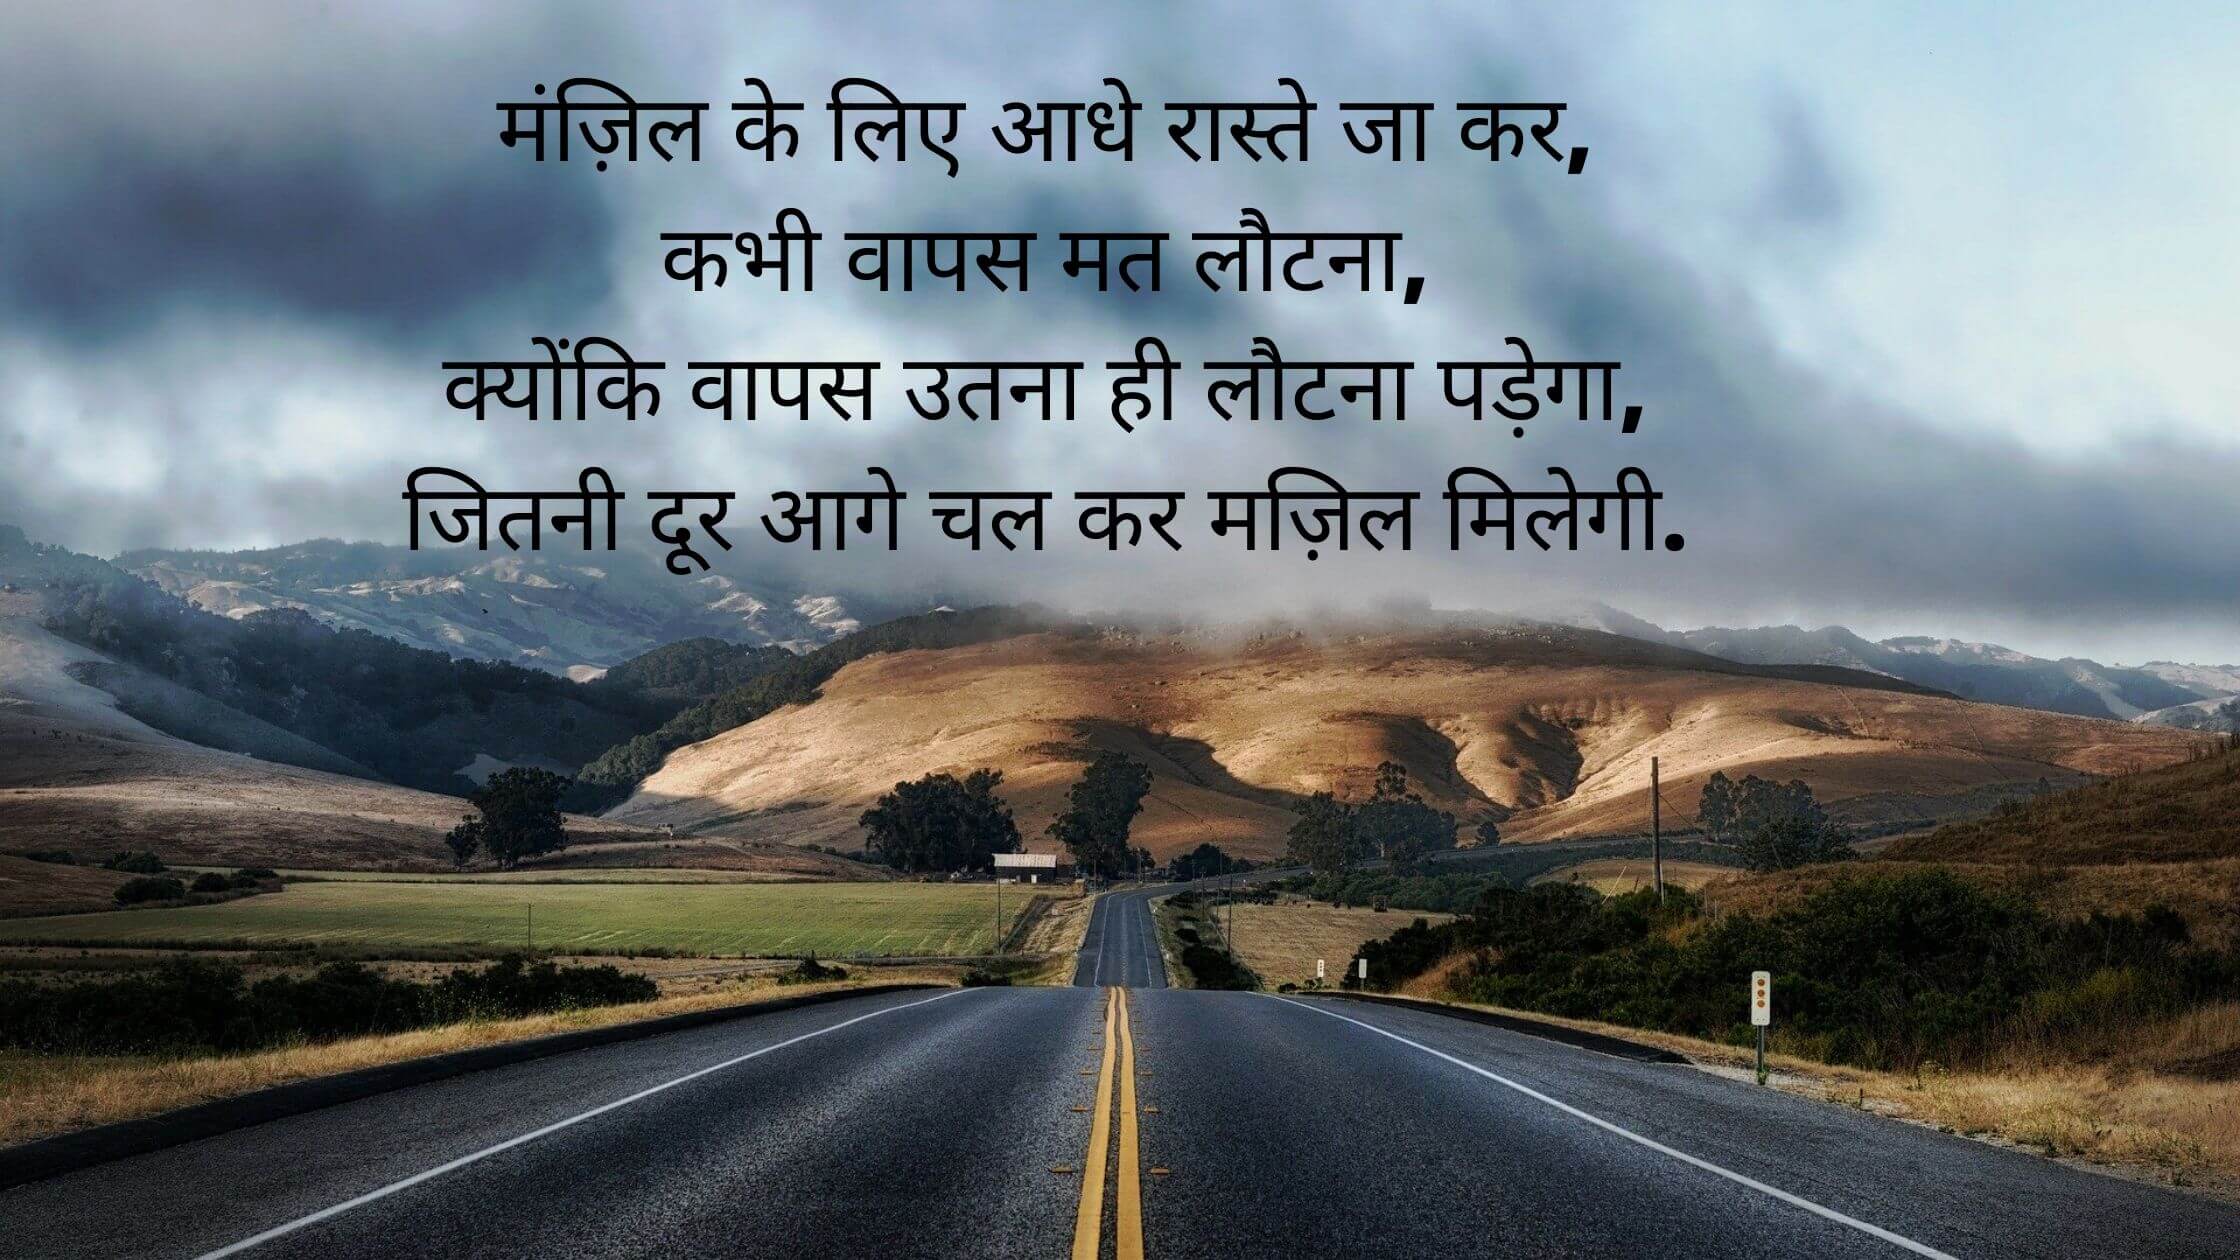 Best Motivational Quotes Images In Hindi | nda.or.ug